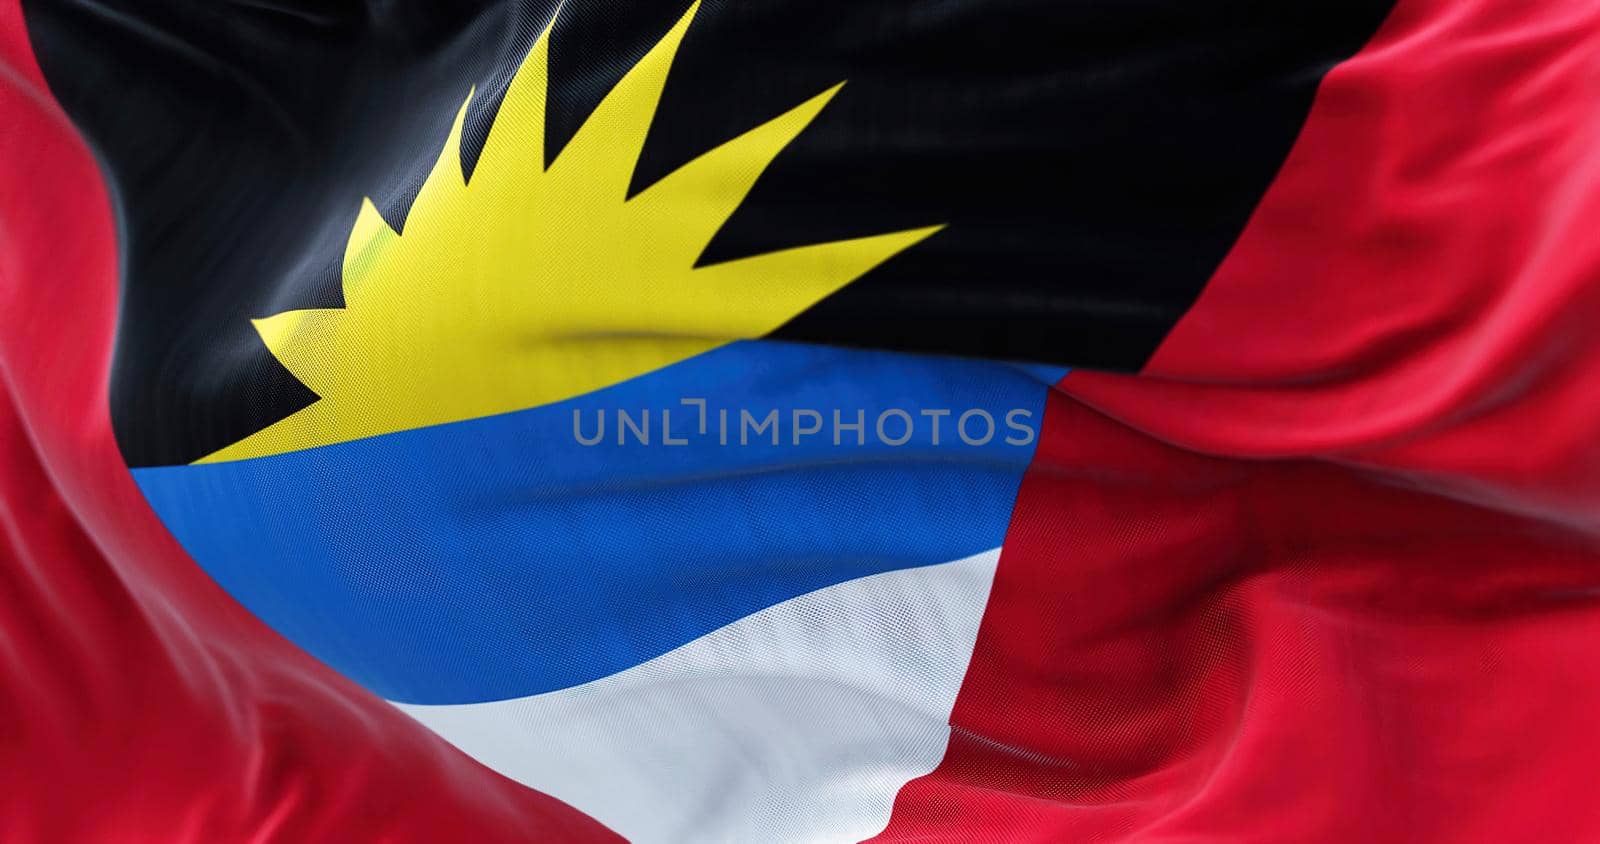 Close-up view of the Antigua and Barbuda national flag waving in the wind. Antigua and Barbuda is a sovereign island country of the West Indies. Fabric textured background. Selective focus